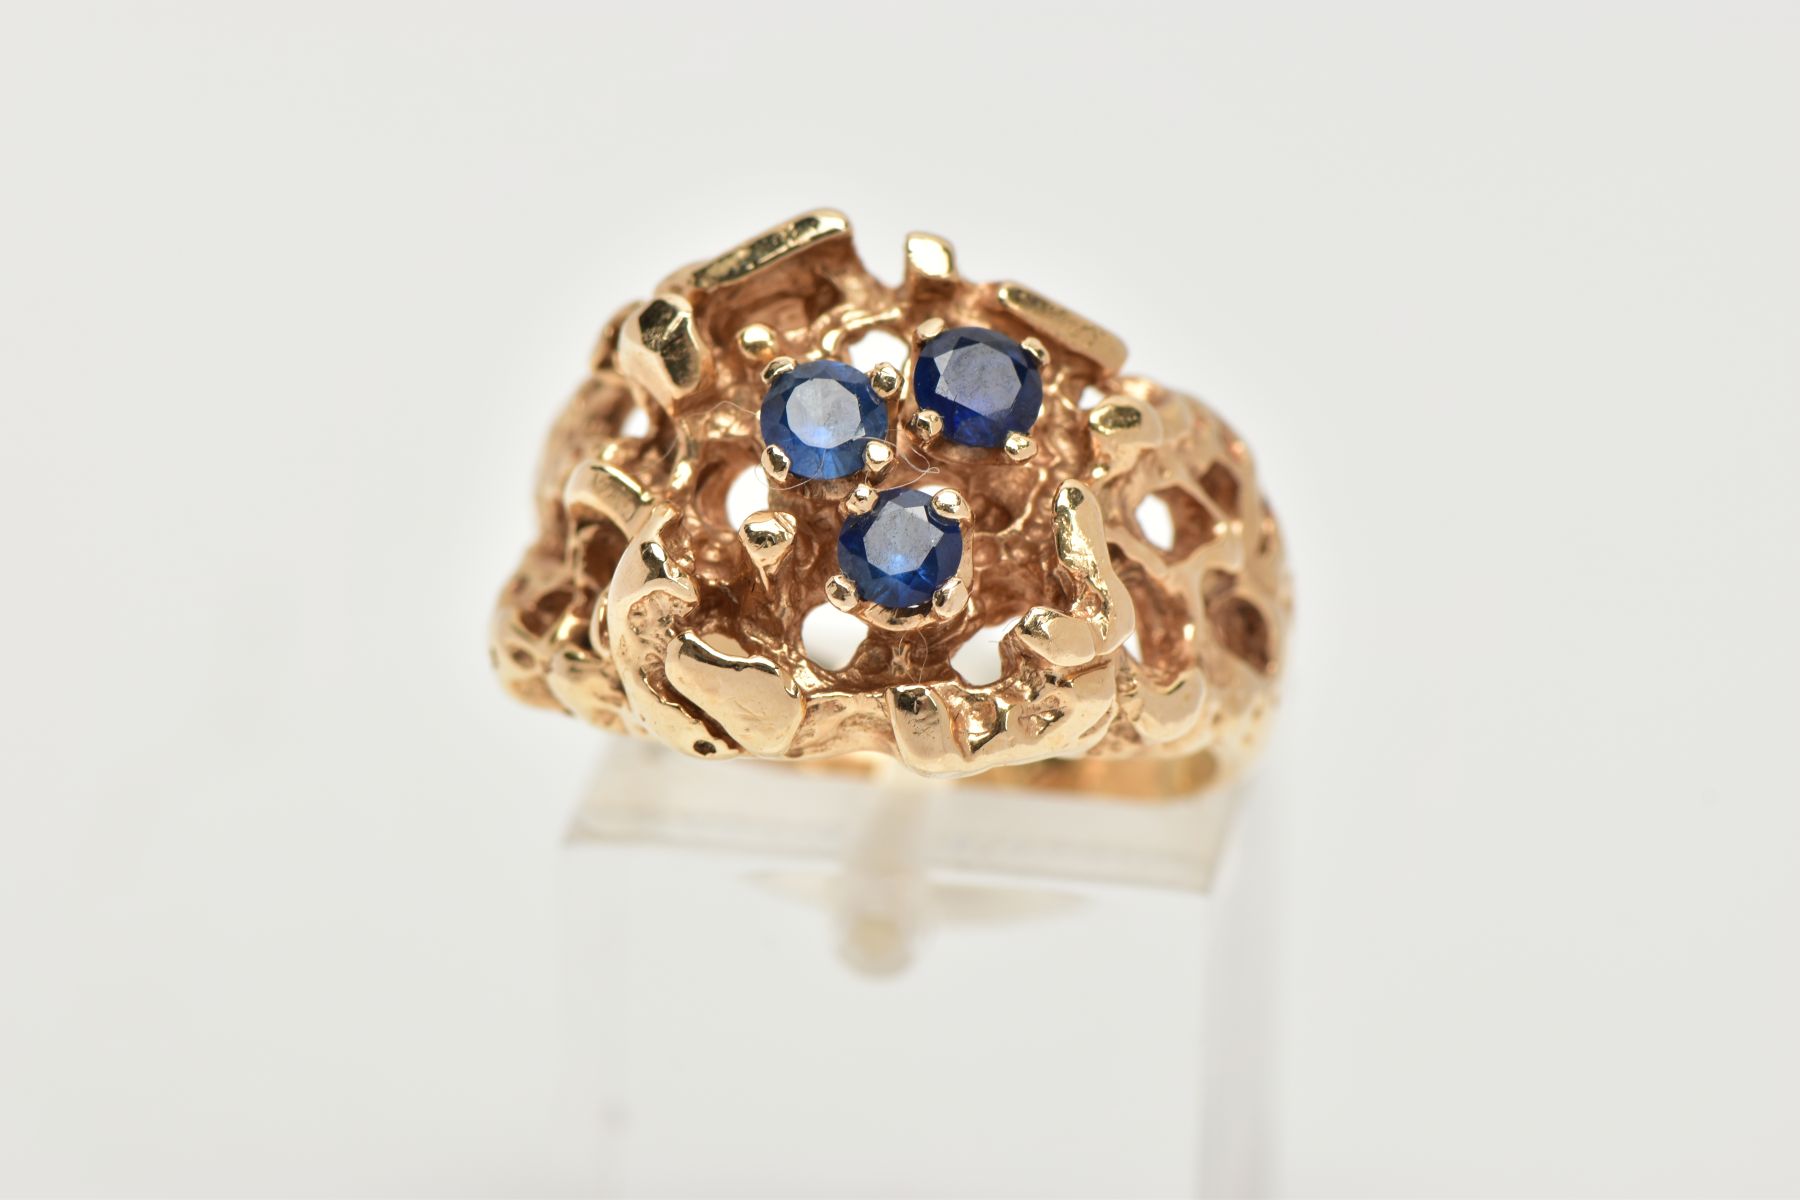 A YELLOW METAL ABSTRACT DRESS RING, an open work textured ring set with three circular cut blue